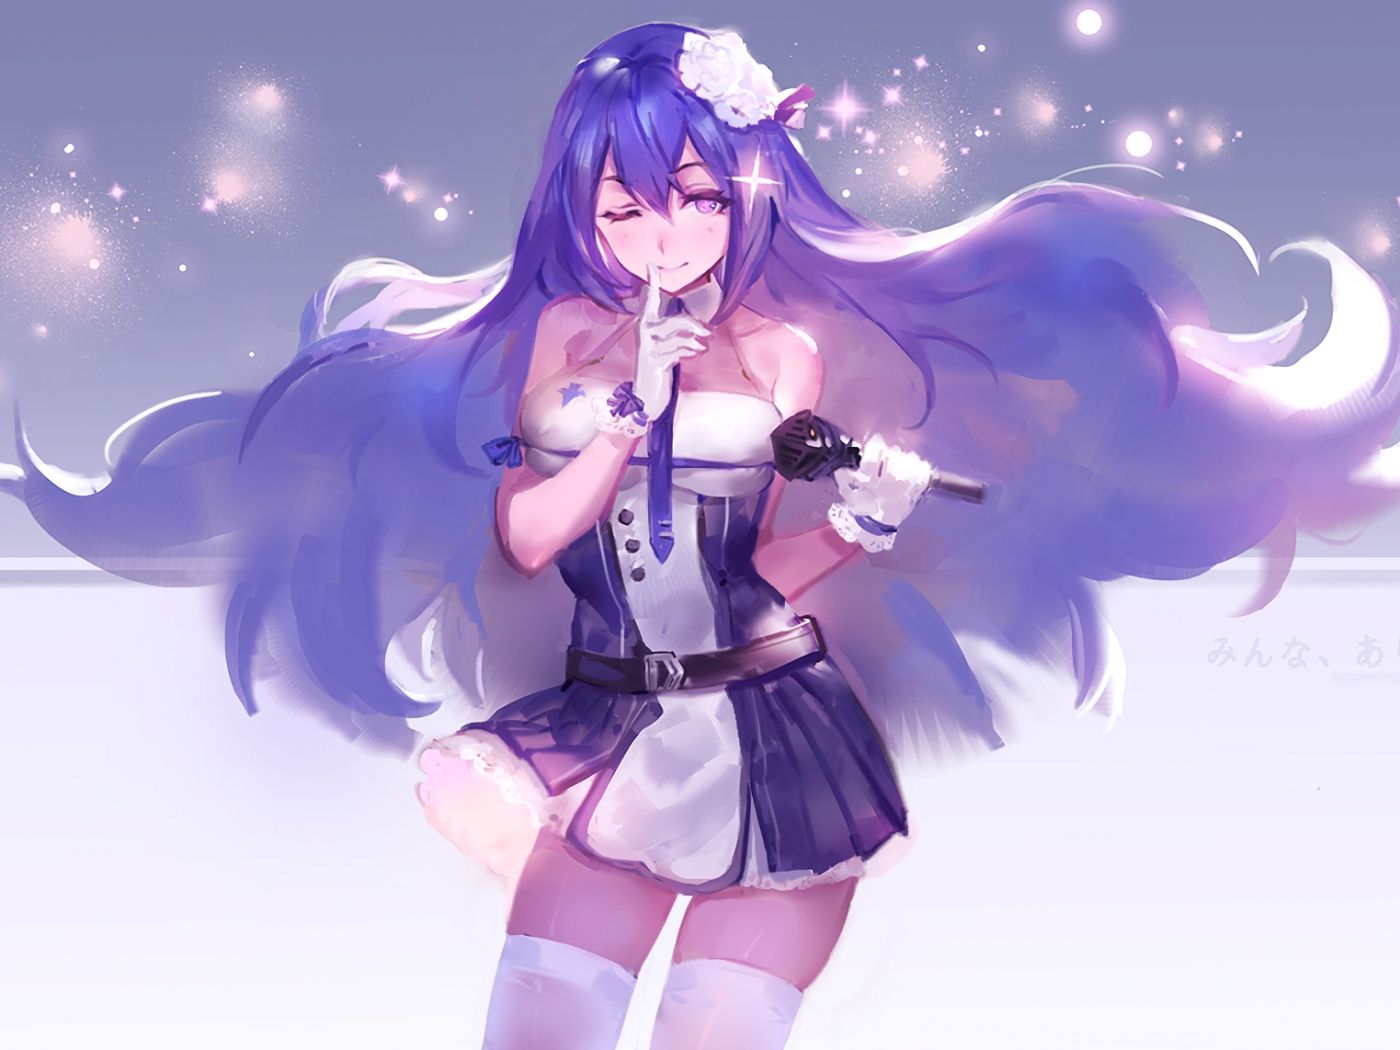 Blue and Purple Hair Girl Illustration - wide 1